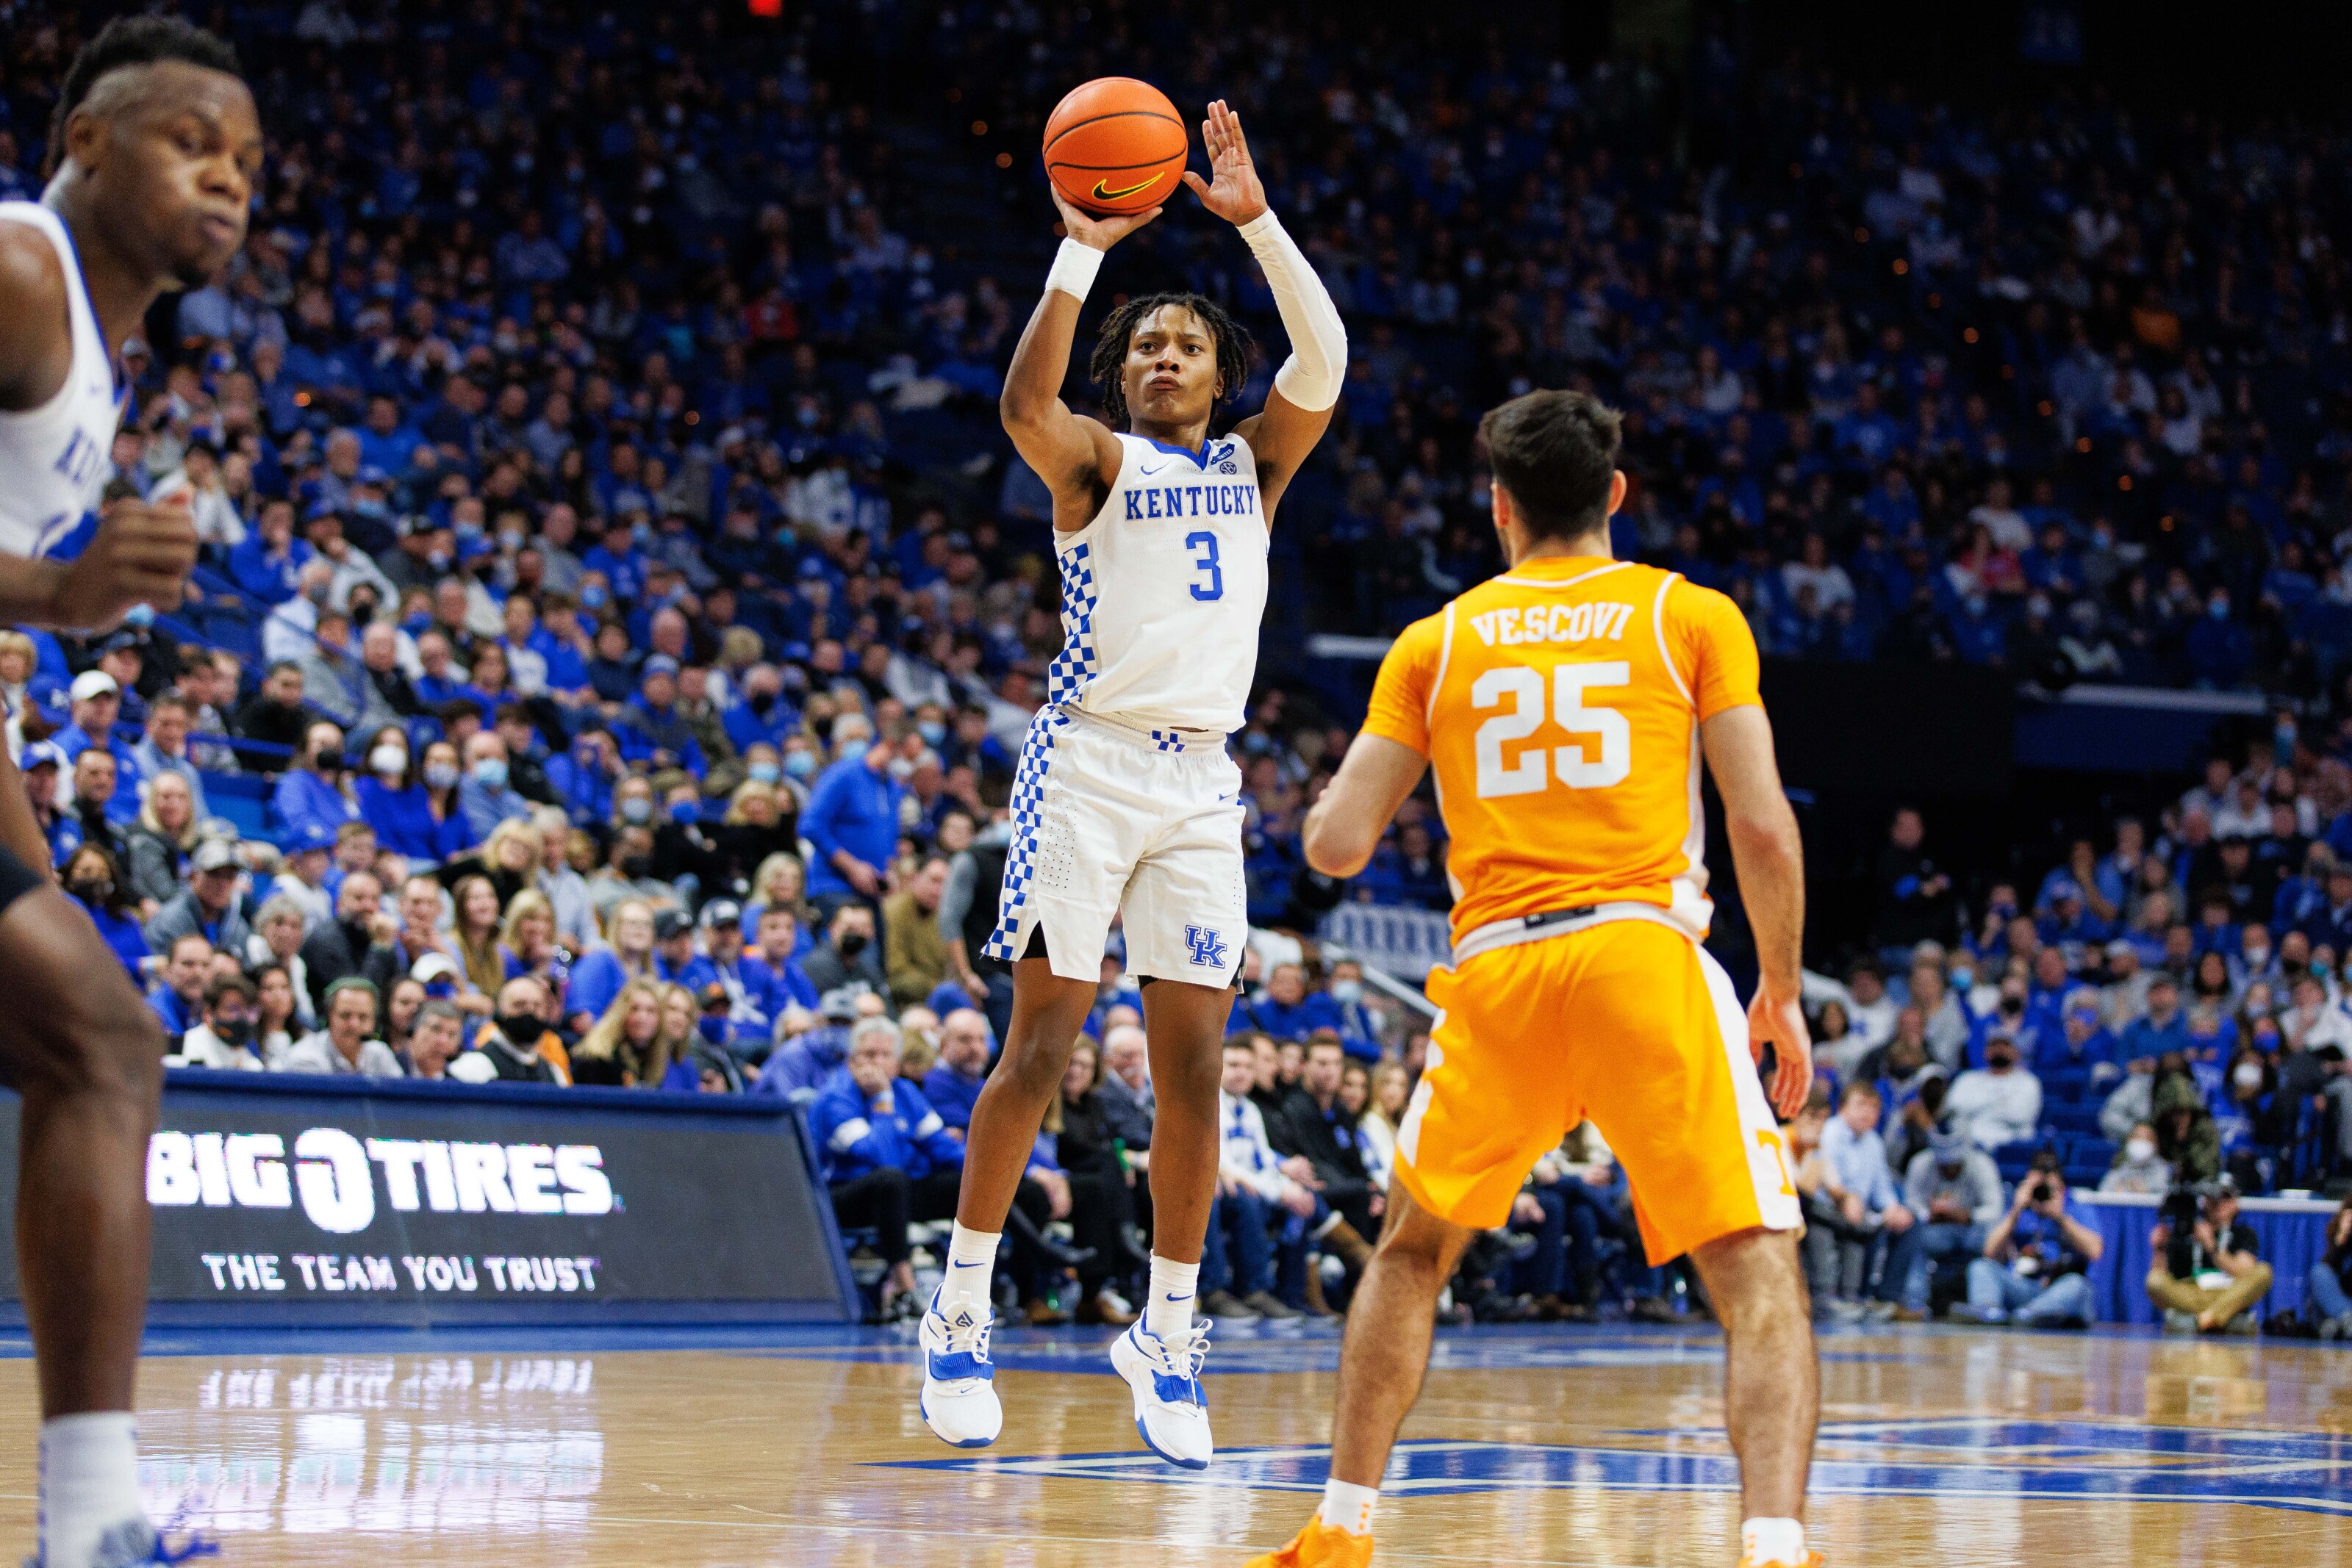 TyTy Washington injured again in Kentucky-Tennessee game